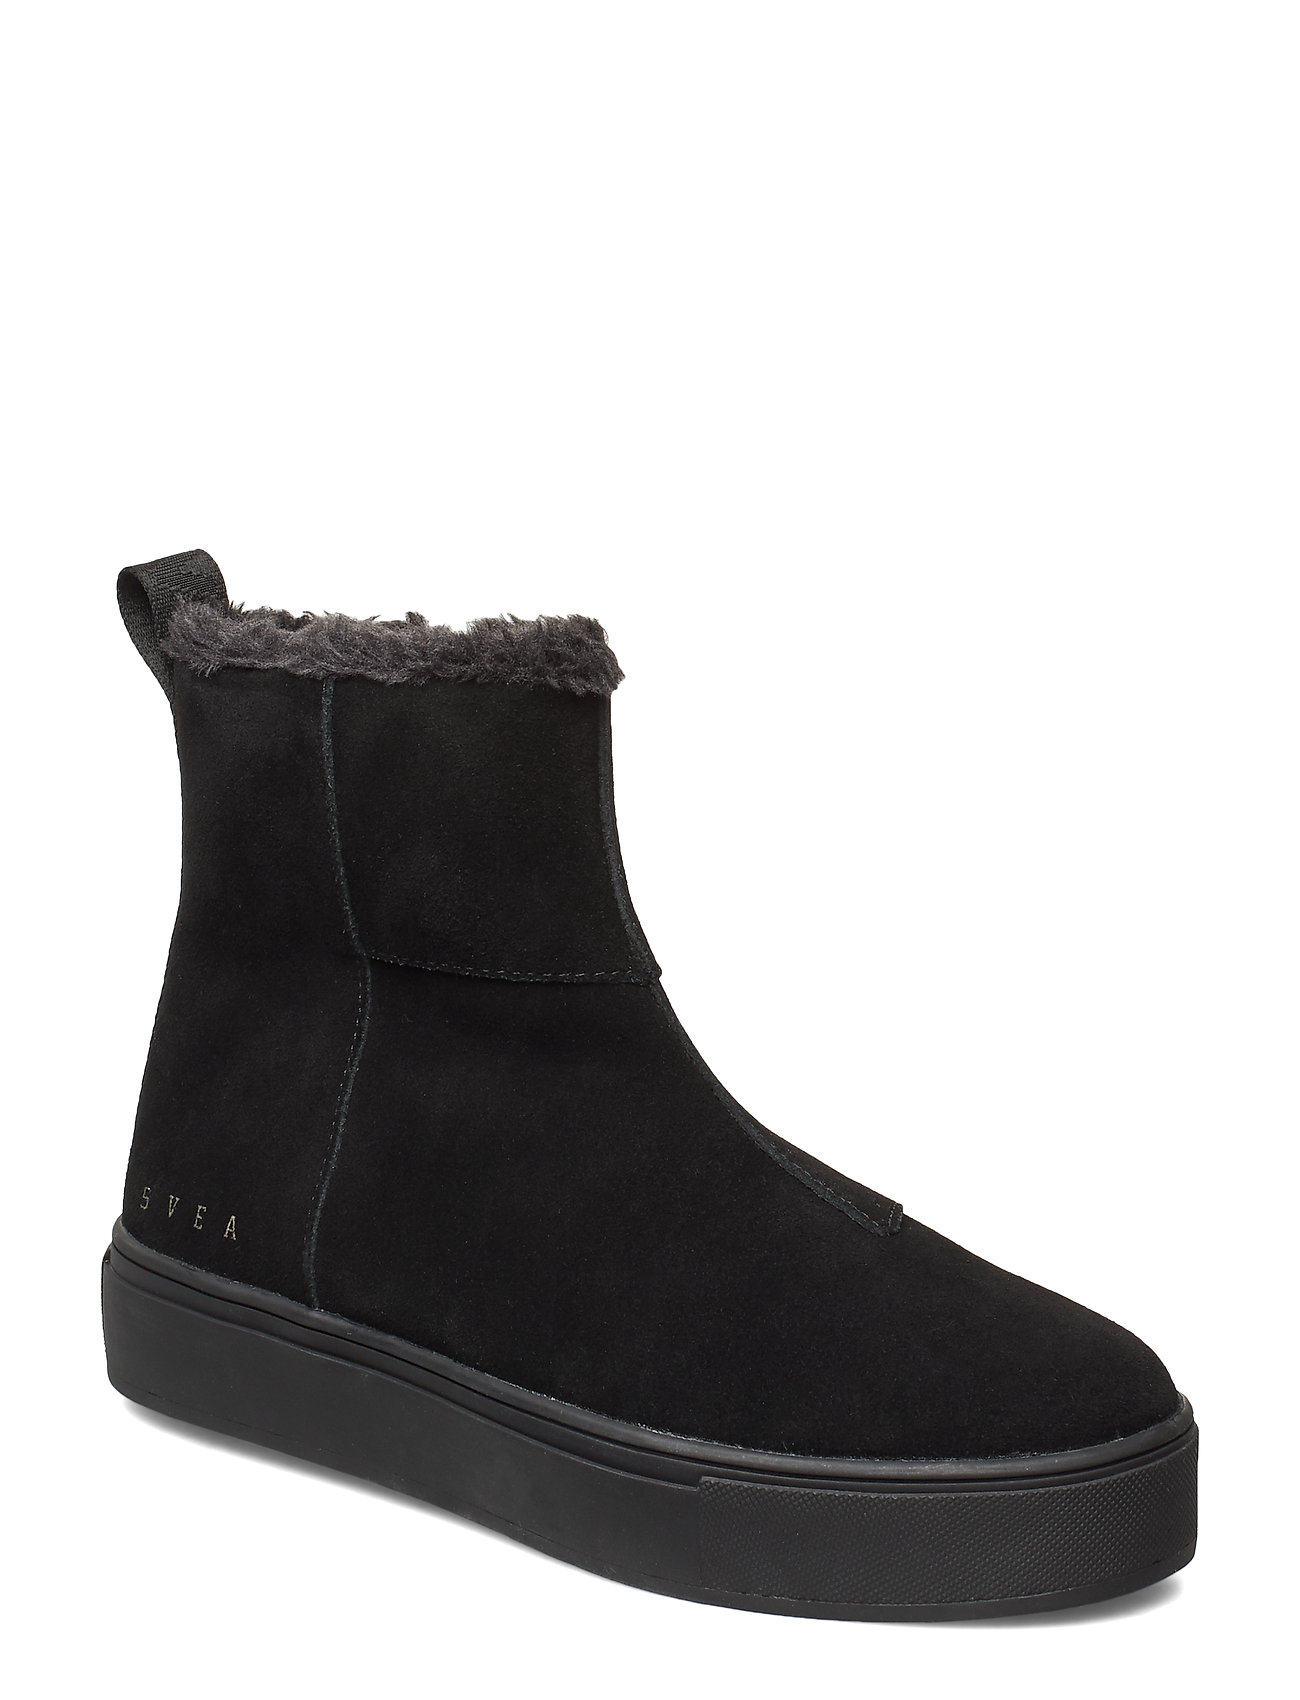 Suede / Pile Boots Shoes Boots Ankle Boots Ankle Boot - Flat Musta Svea